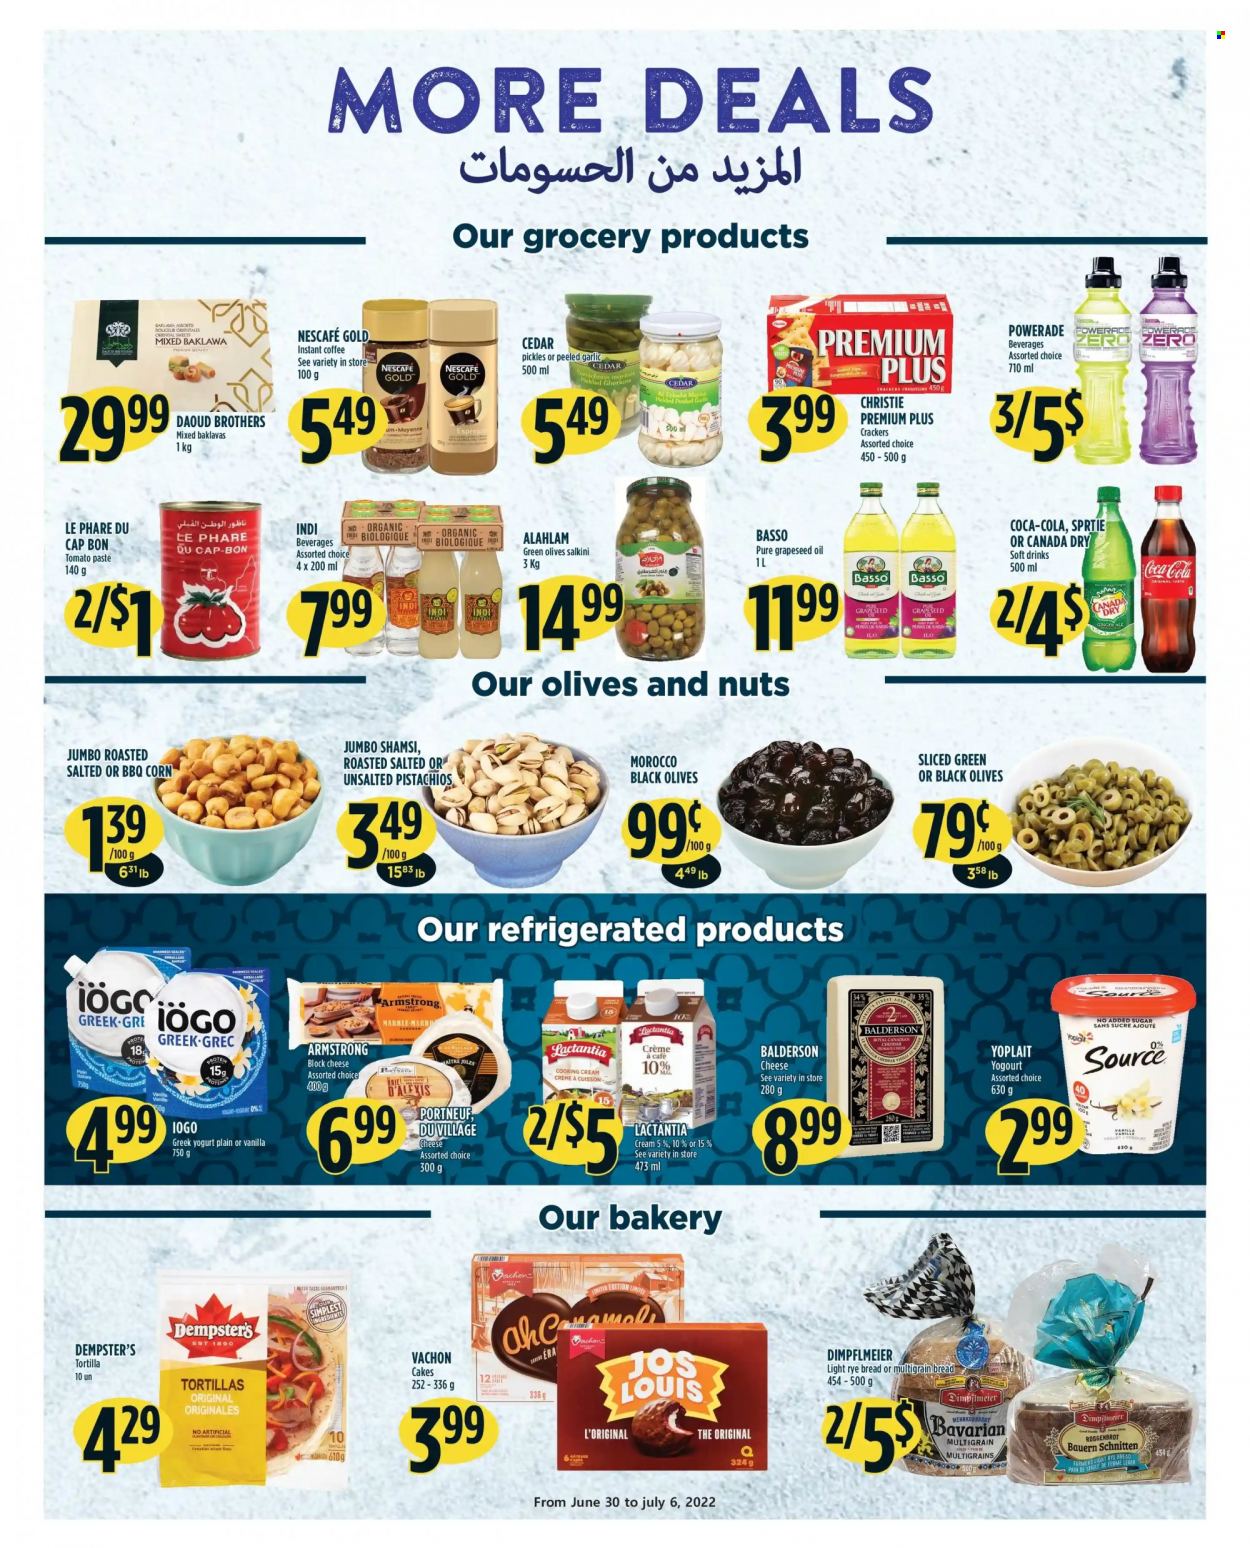 thumbnail - Adonis Flyer - June 30, 2022 - July 06, 2022 - Sales products - multigrain bread, tortillas, cake, corn, garlic, cheddar, cheese, greek yoghurt, yoghurt, Yoplait, crackers, tomato paste, pickles, oil, grape seed oil, pistachios, Canada Dry, Coca-Cola, Powerade, soft drink, instant coffee, BROTHERS, olives, Nescafé. Page 8.